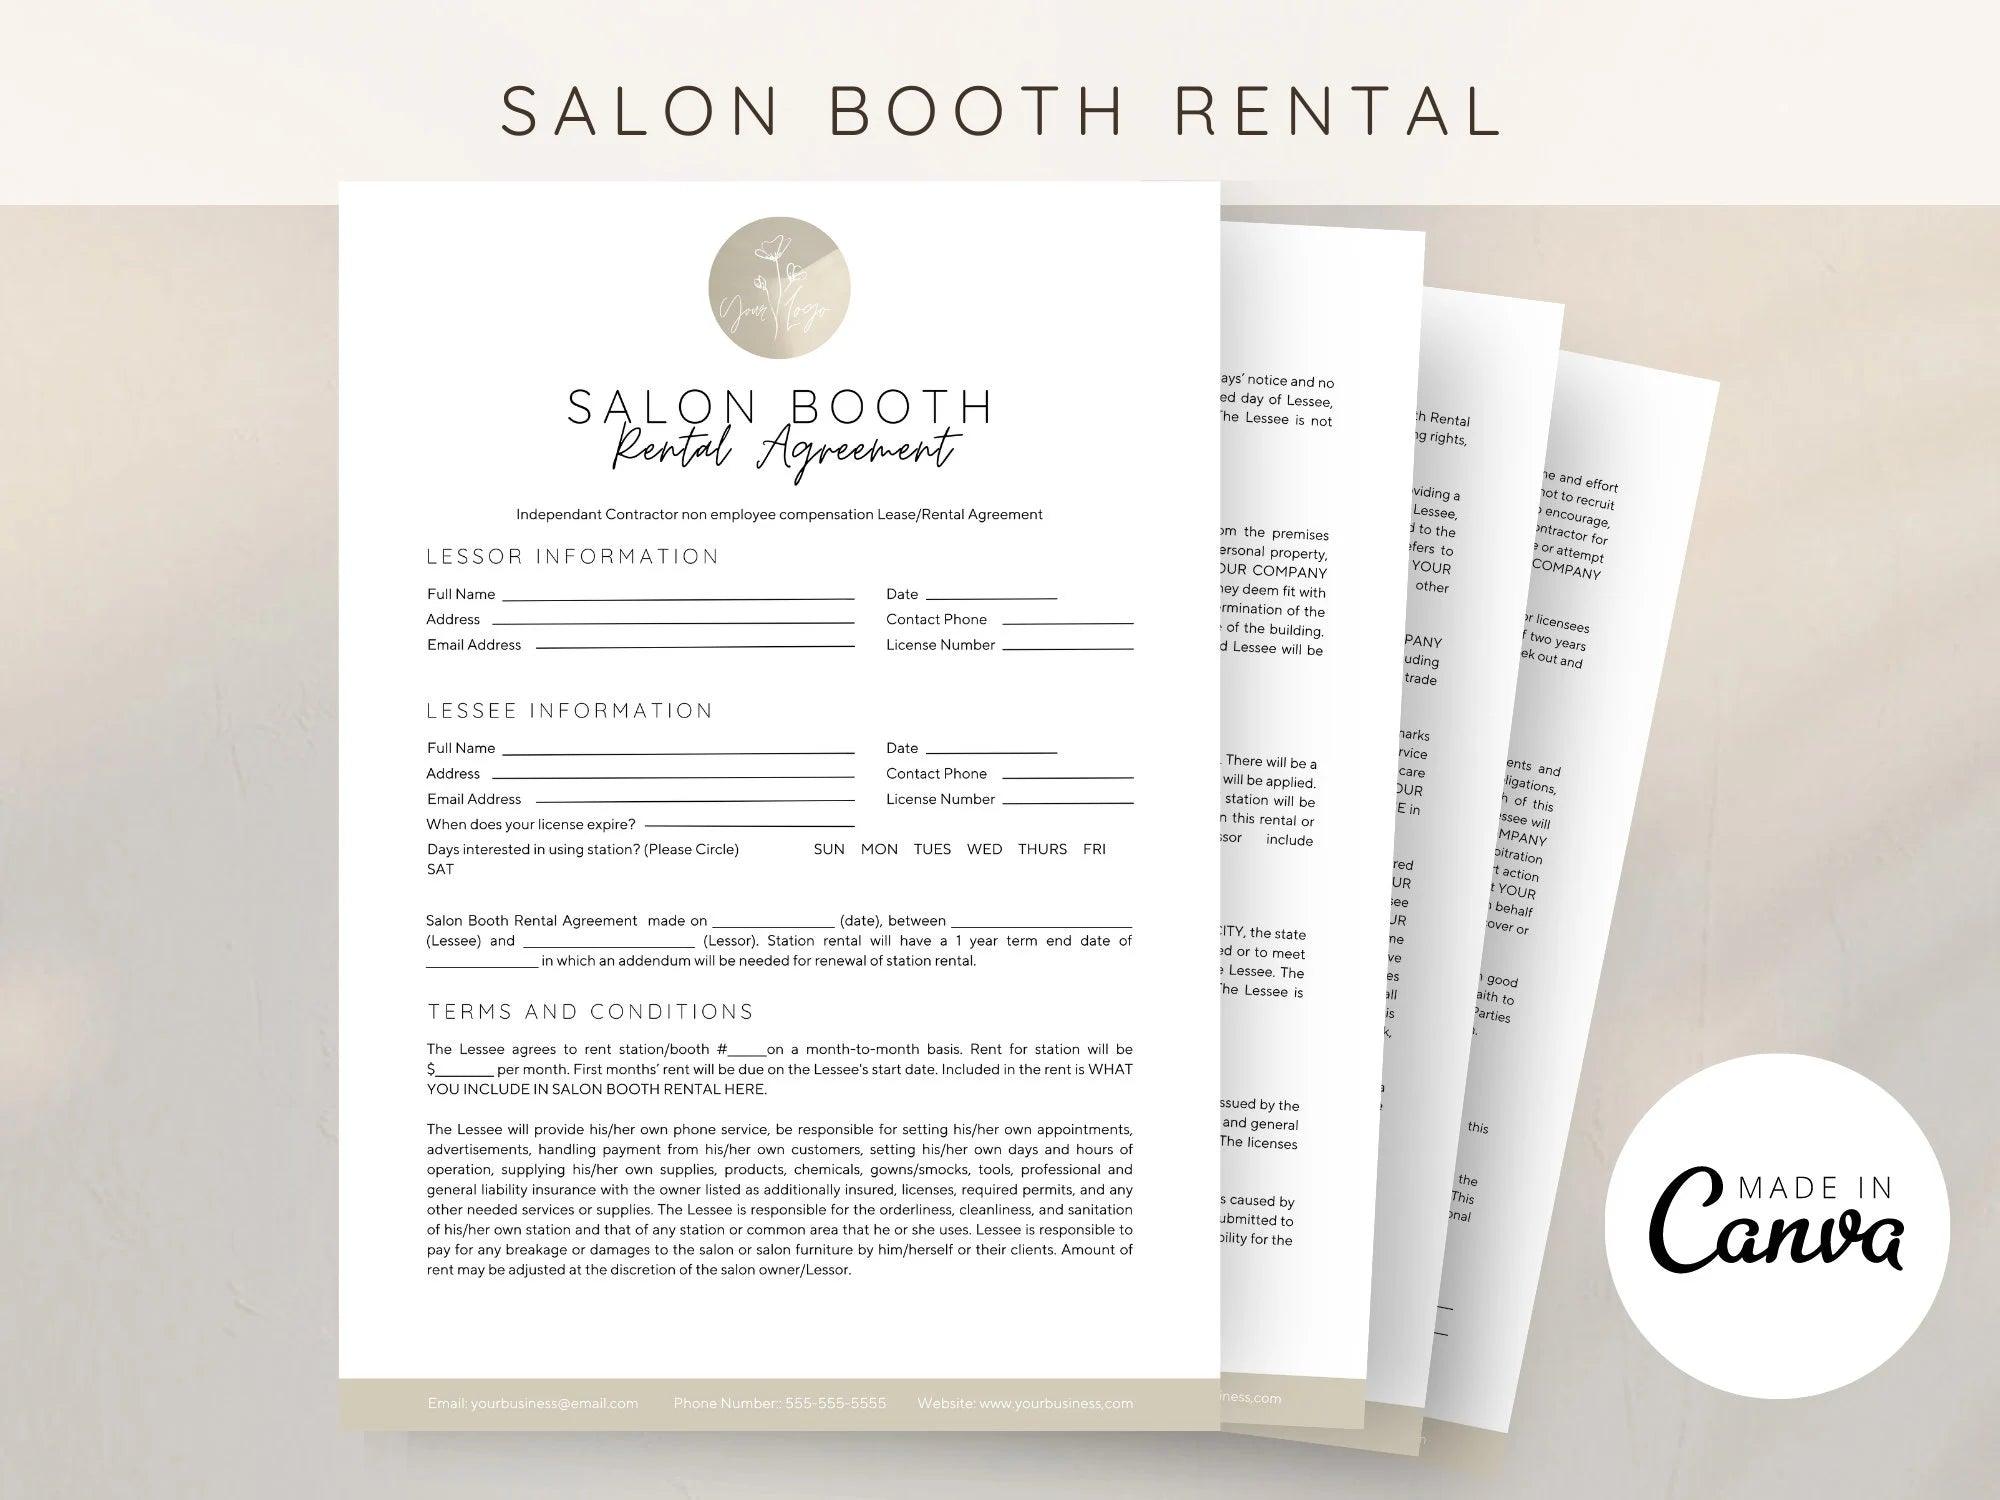 Salon Booth Rental Contract Canva Template - Un-Stripped